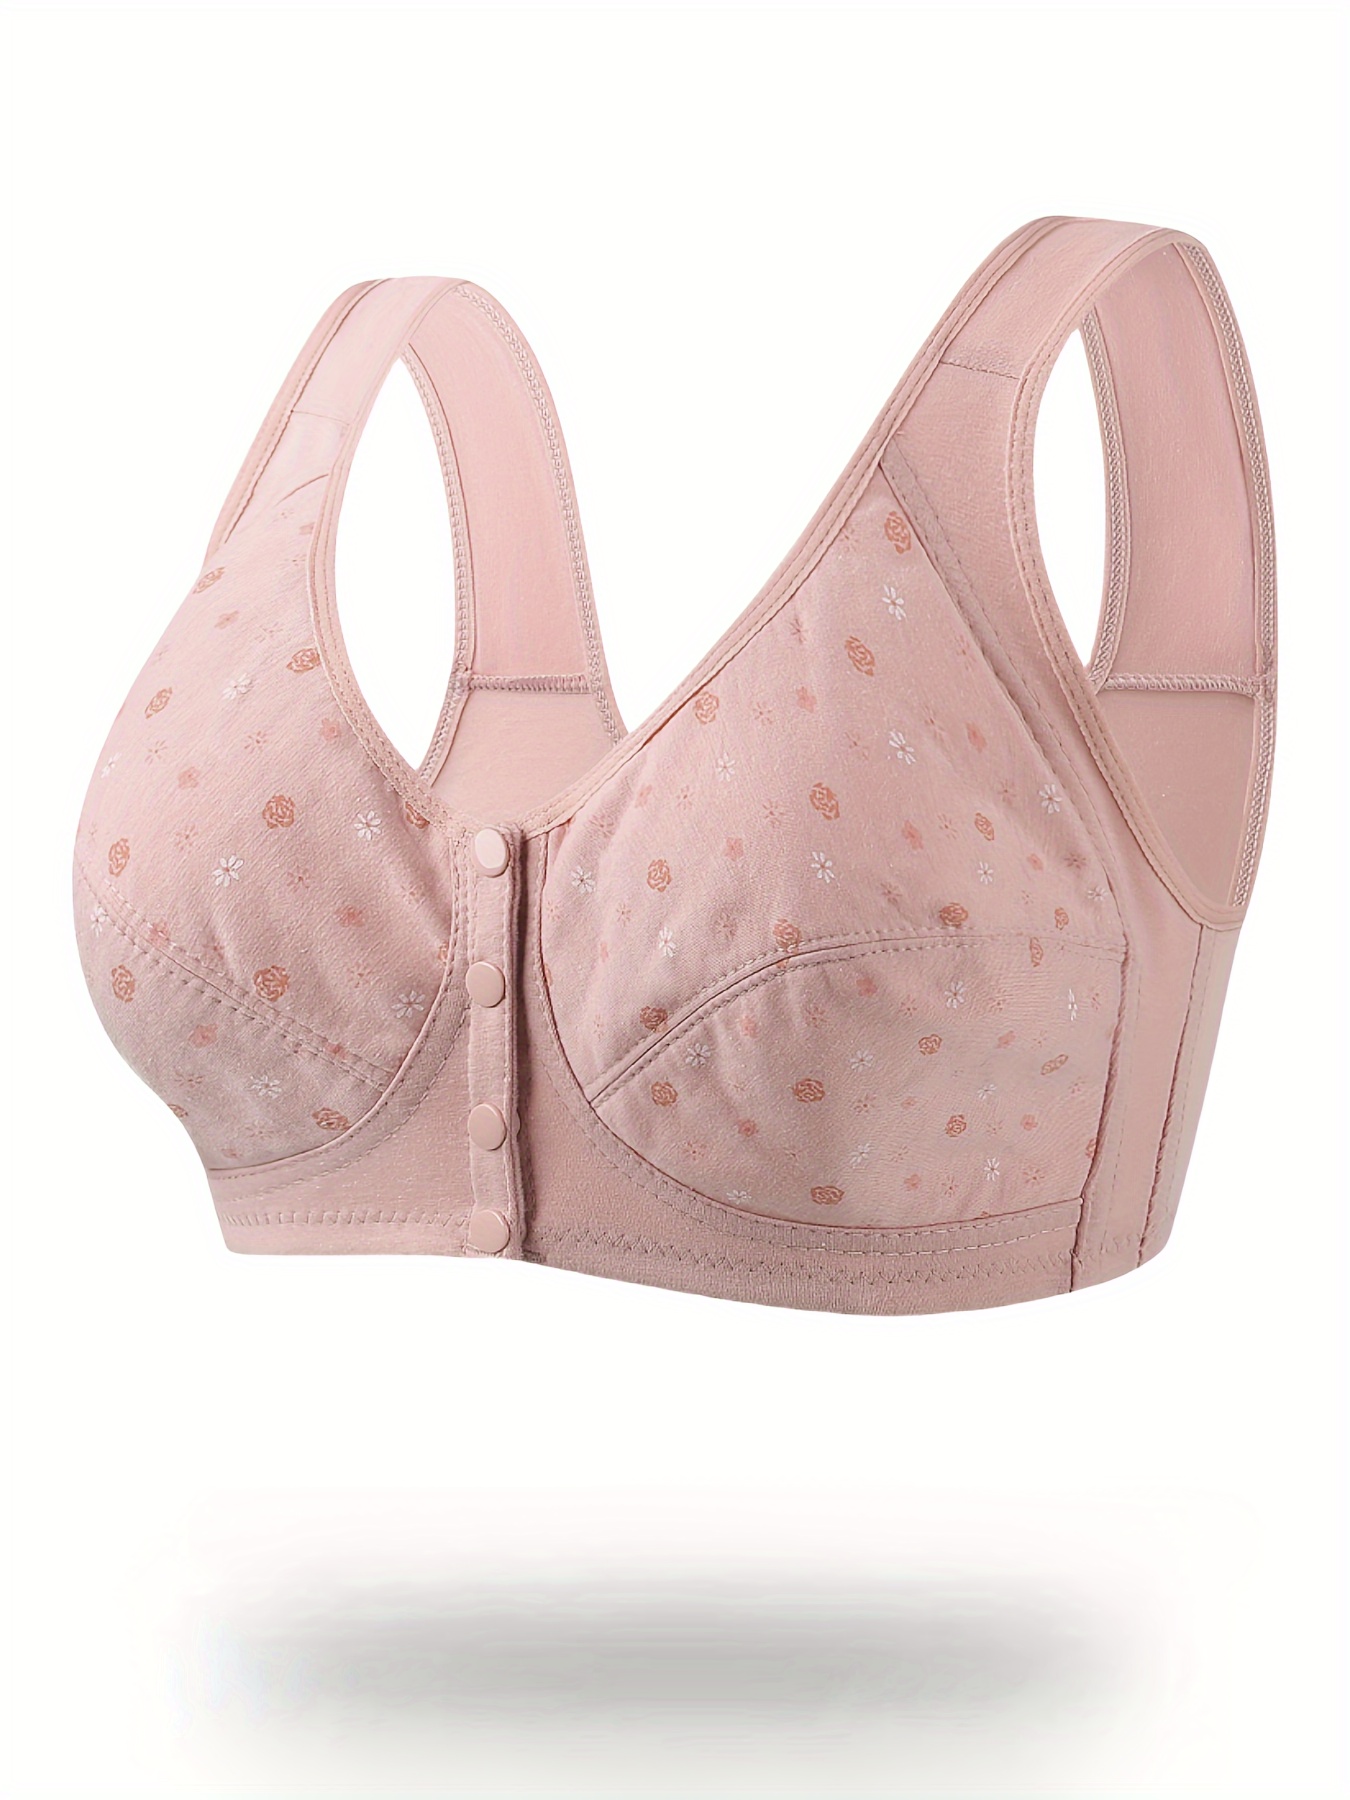 Plus Size Middle and Elderly Women Cotton Printed Bras Wireless